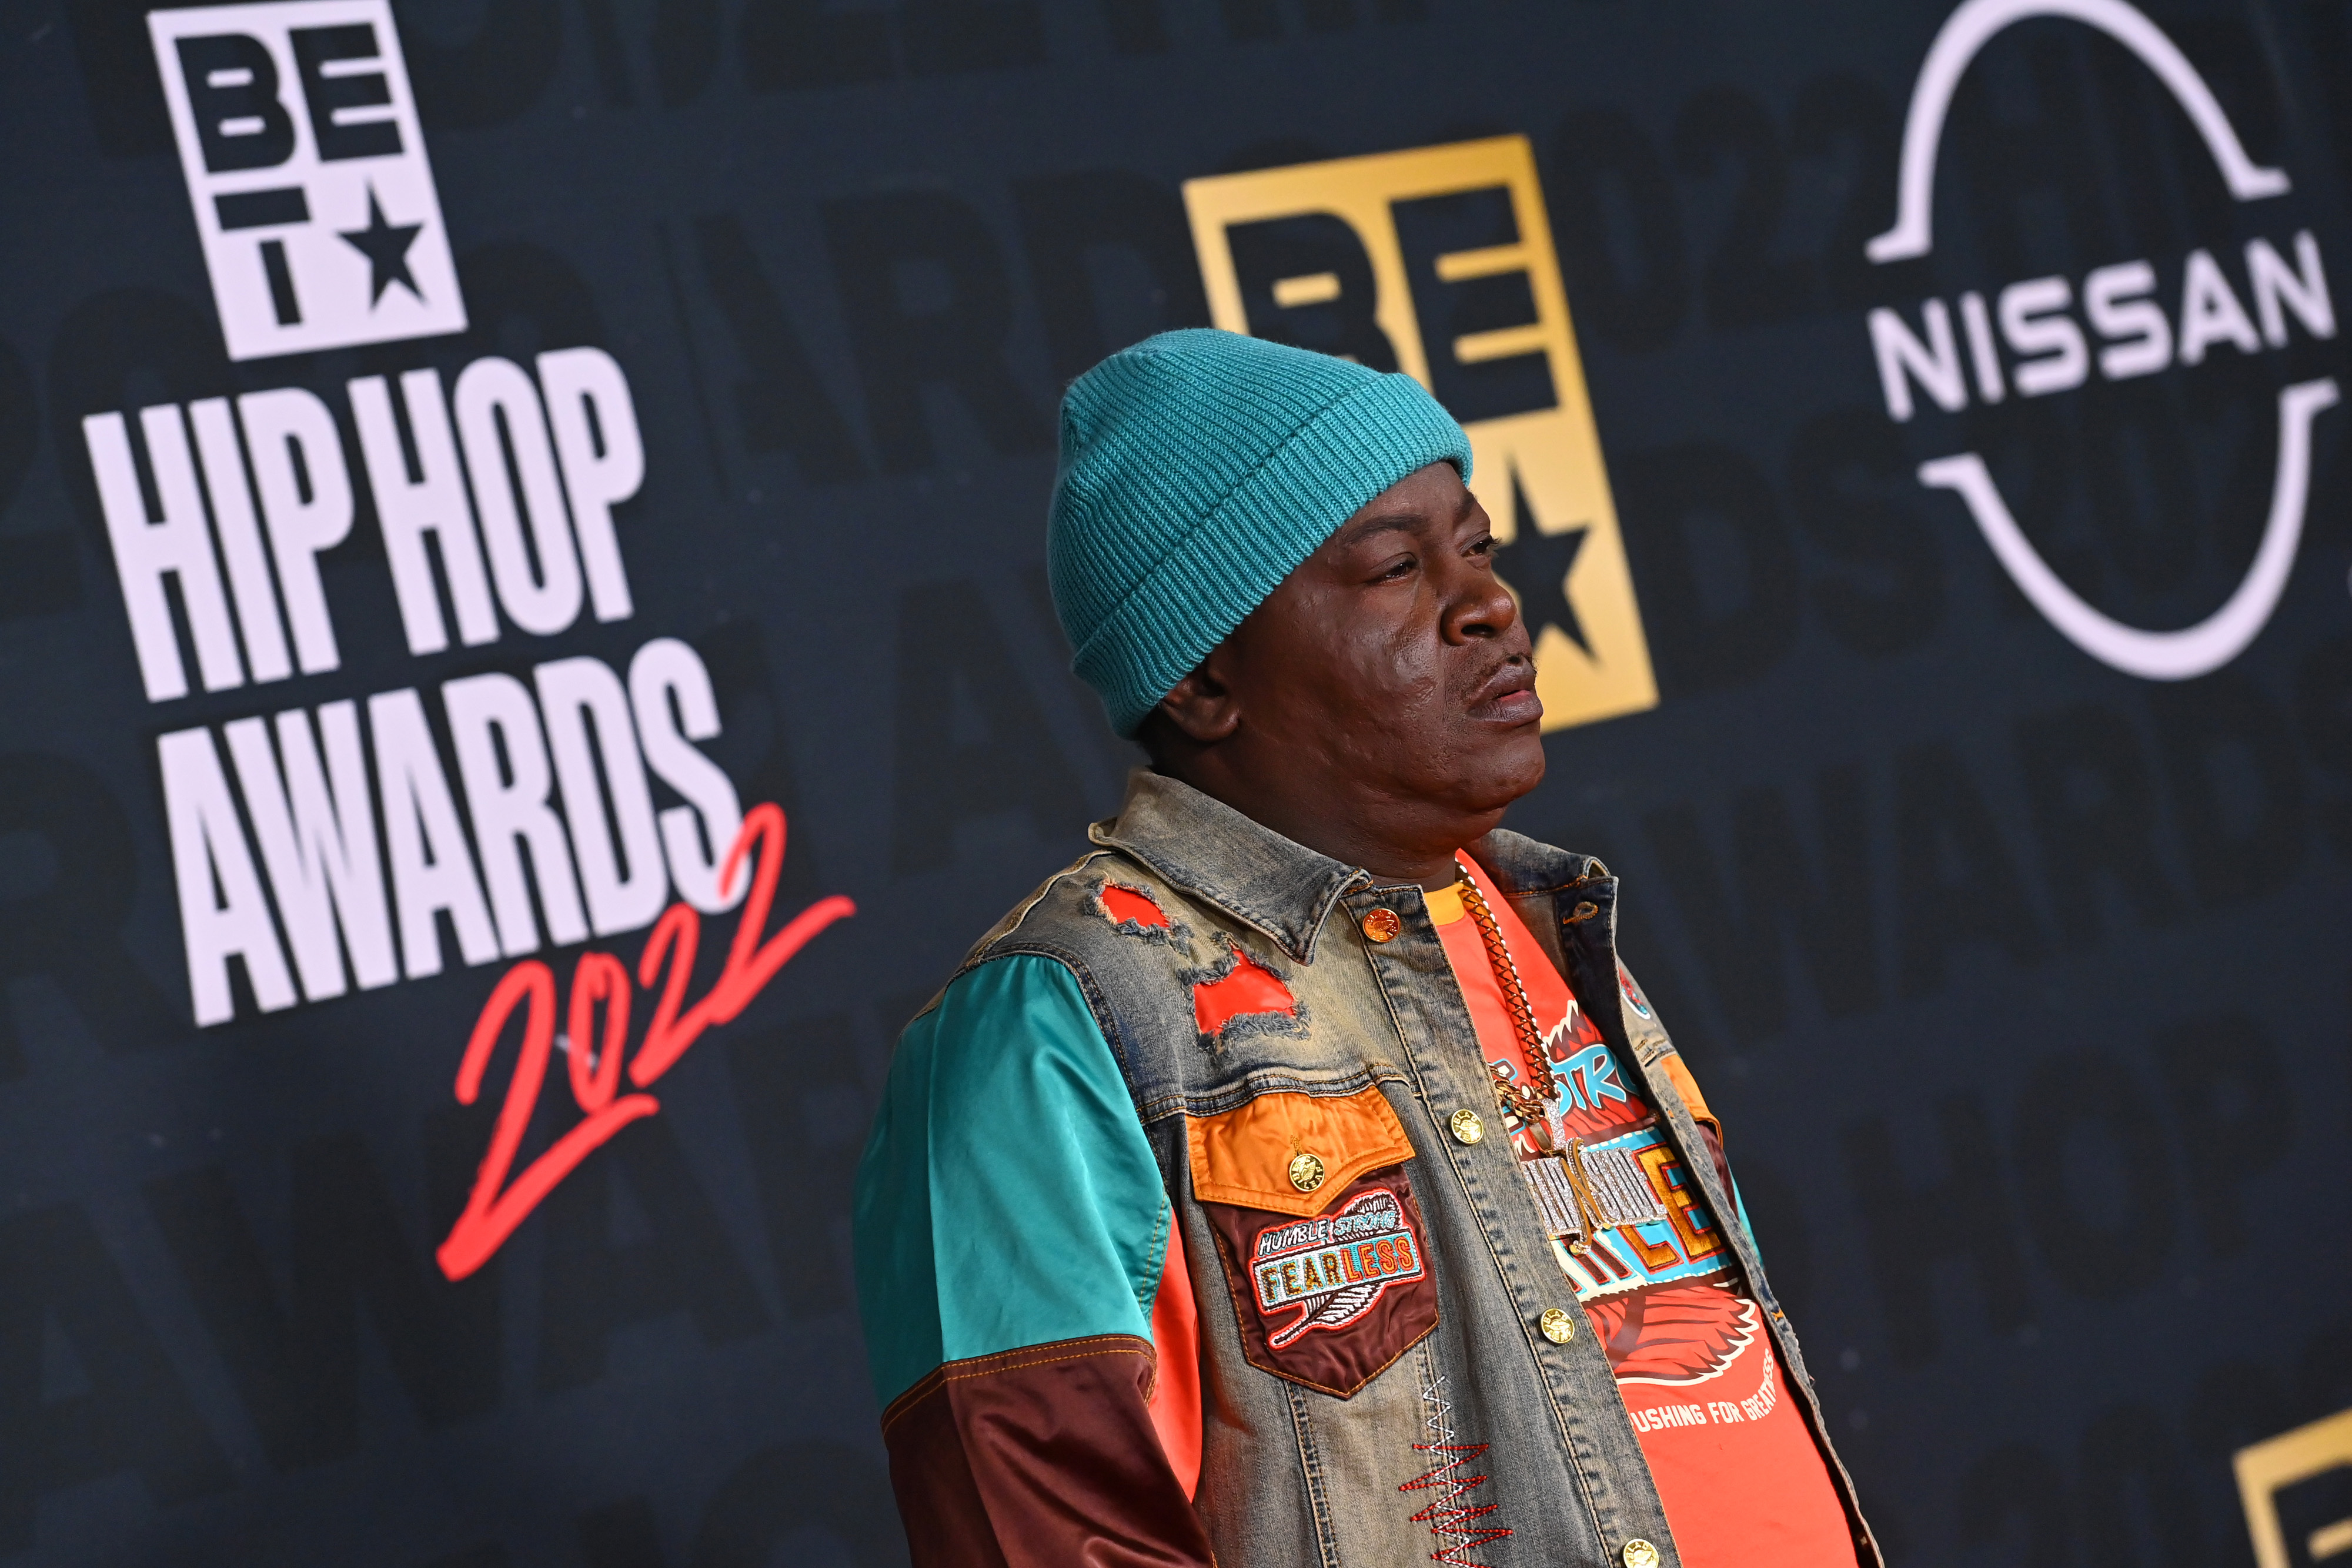 Trick Daddy attends the BET Hip Hop Awards 2022 at The Cobb Theater on September 30, 2022, in Atlanta, Georgia. | Source: Getty Images